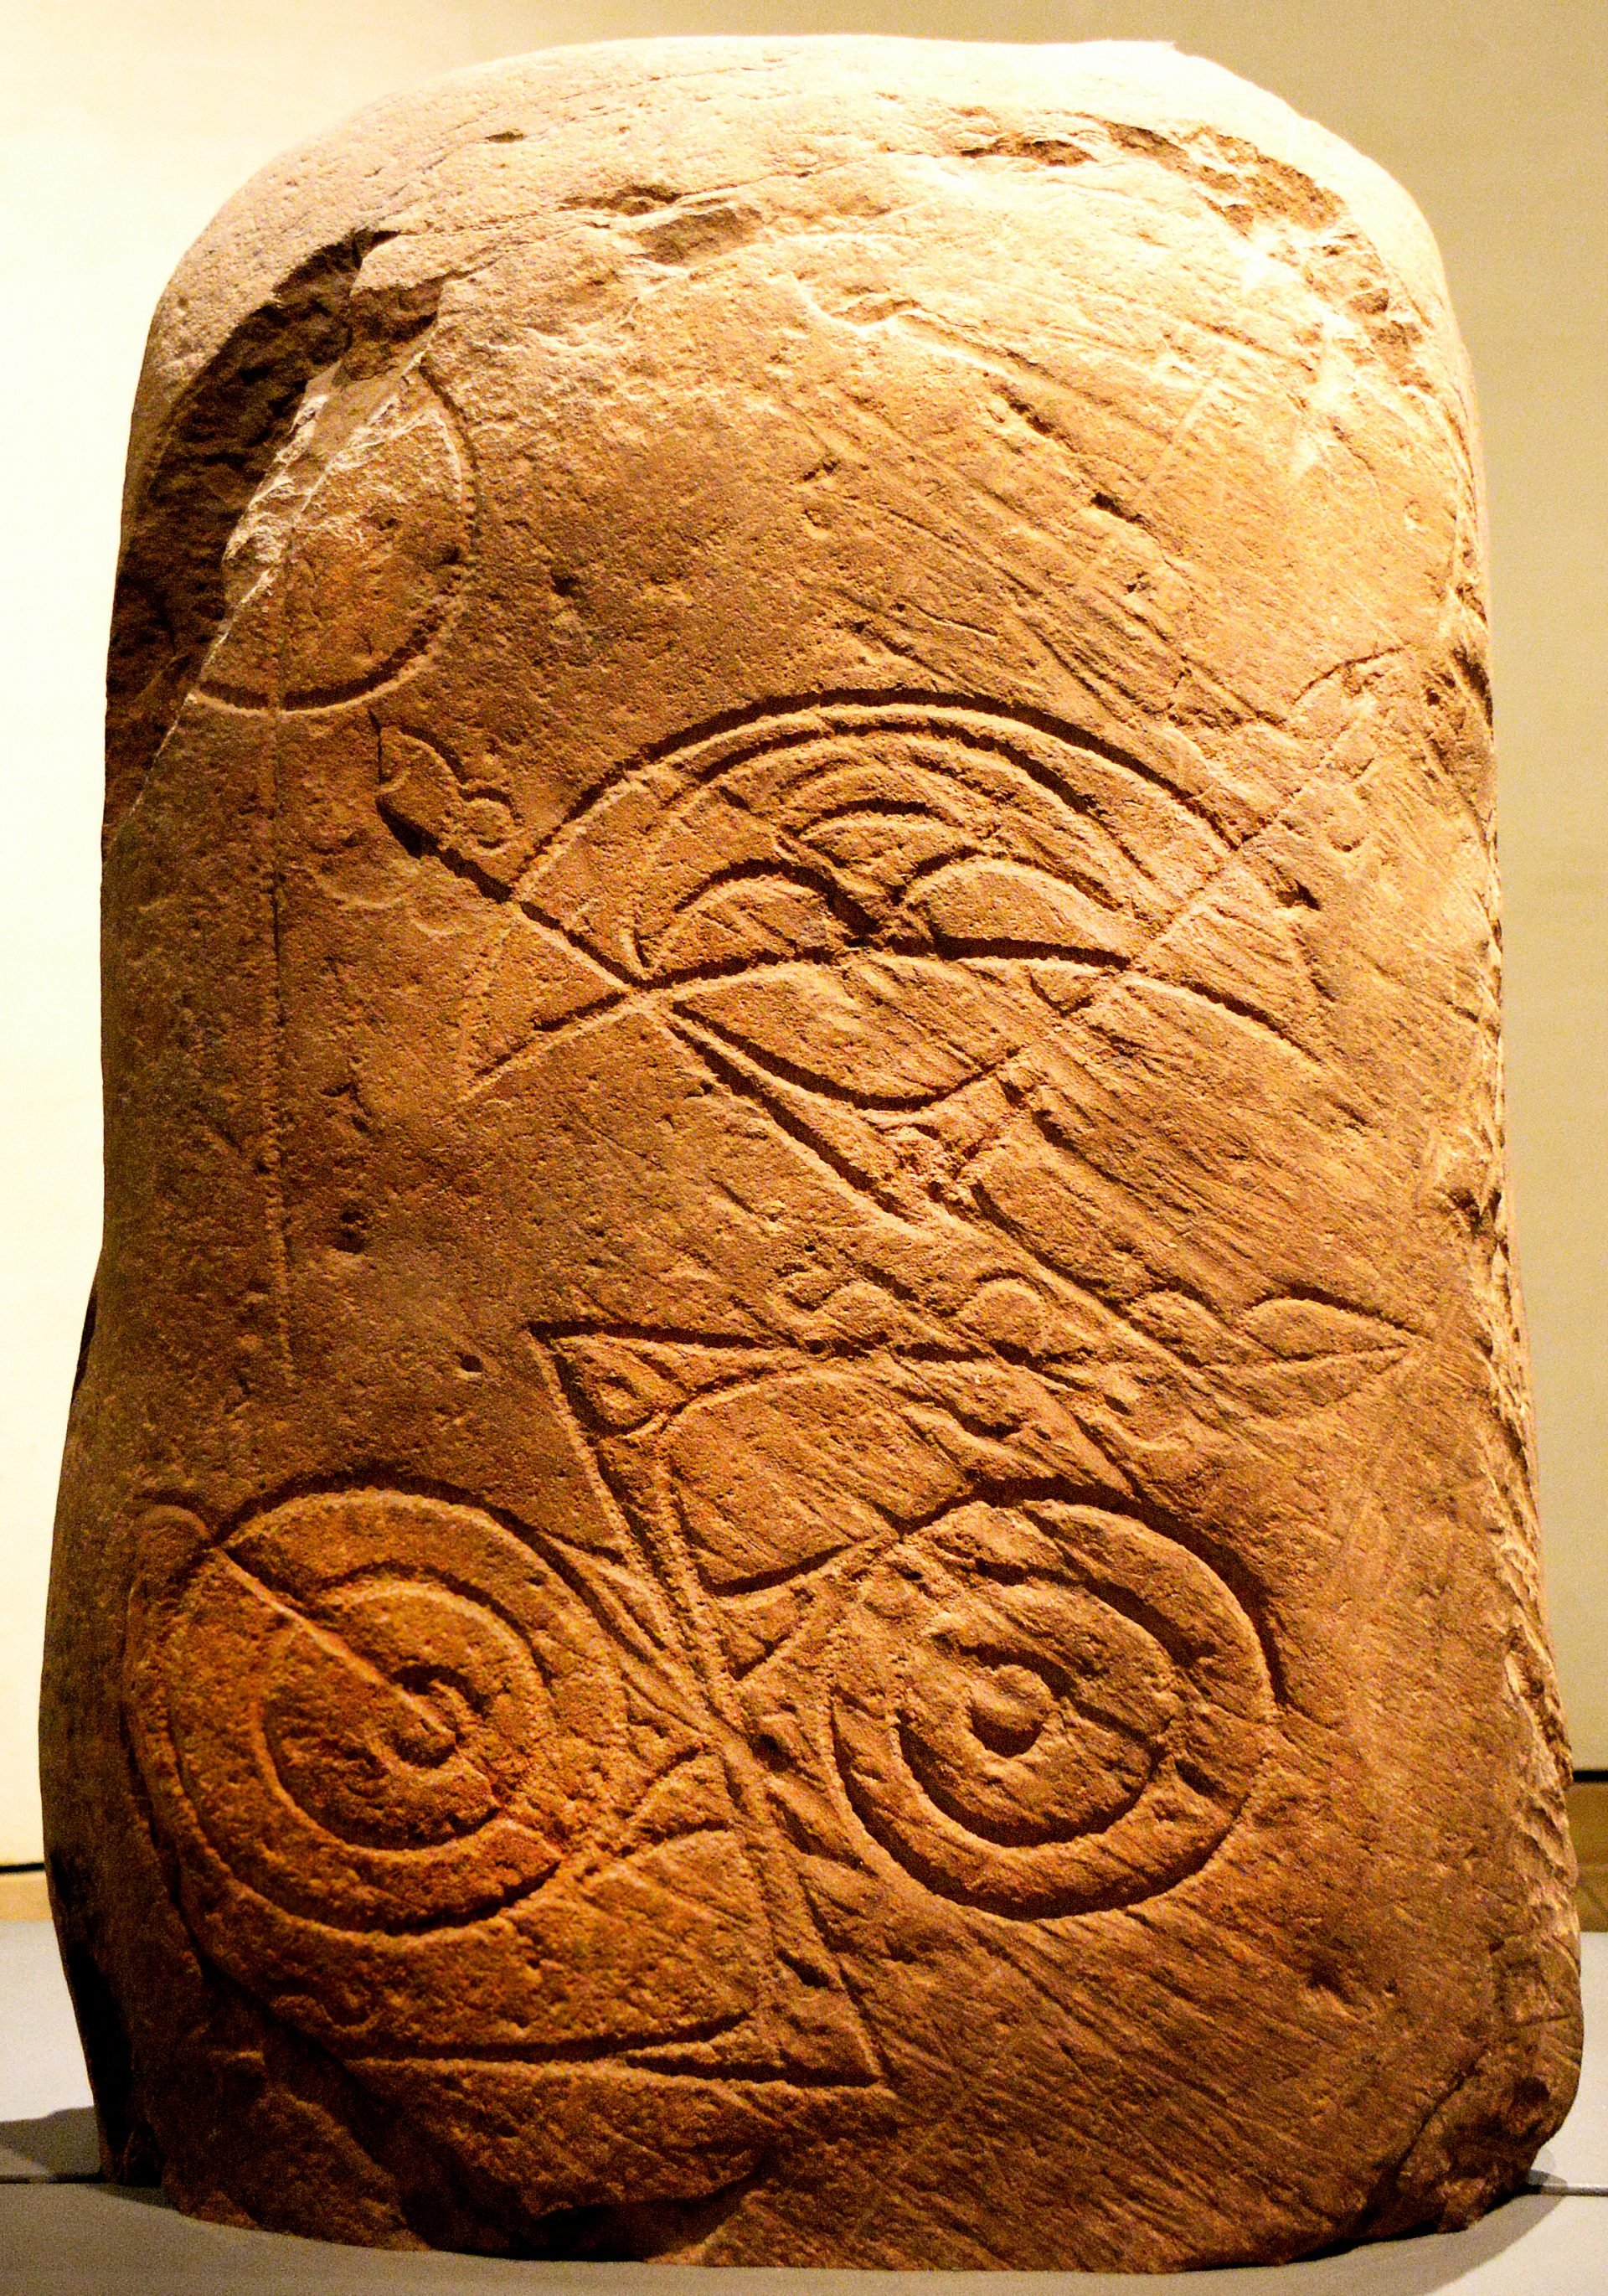 A stone engraved with Pictish symbols from the 7th and 8th century CE, featuring double-disc, crescent, and z- and v-shapes. The exact significance of these symbols remains historically unclear.